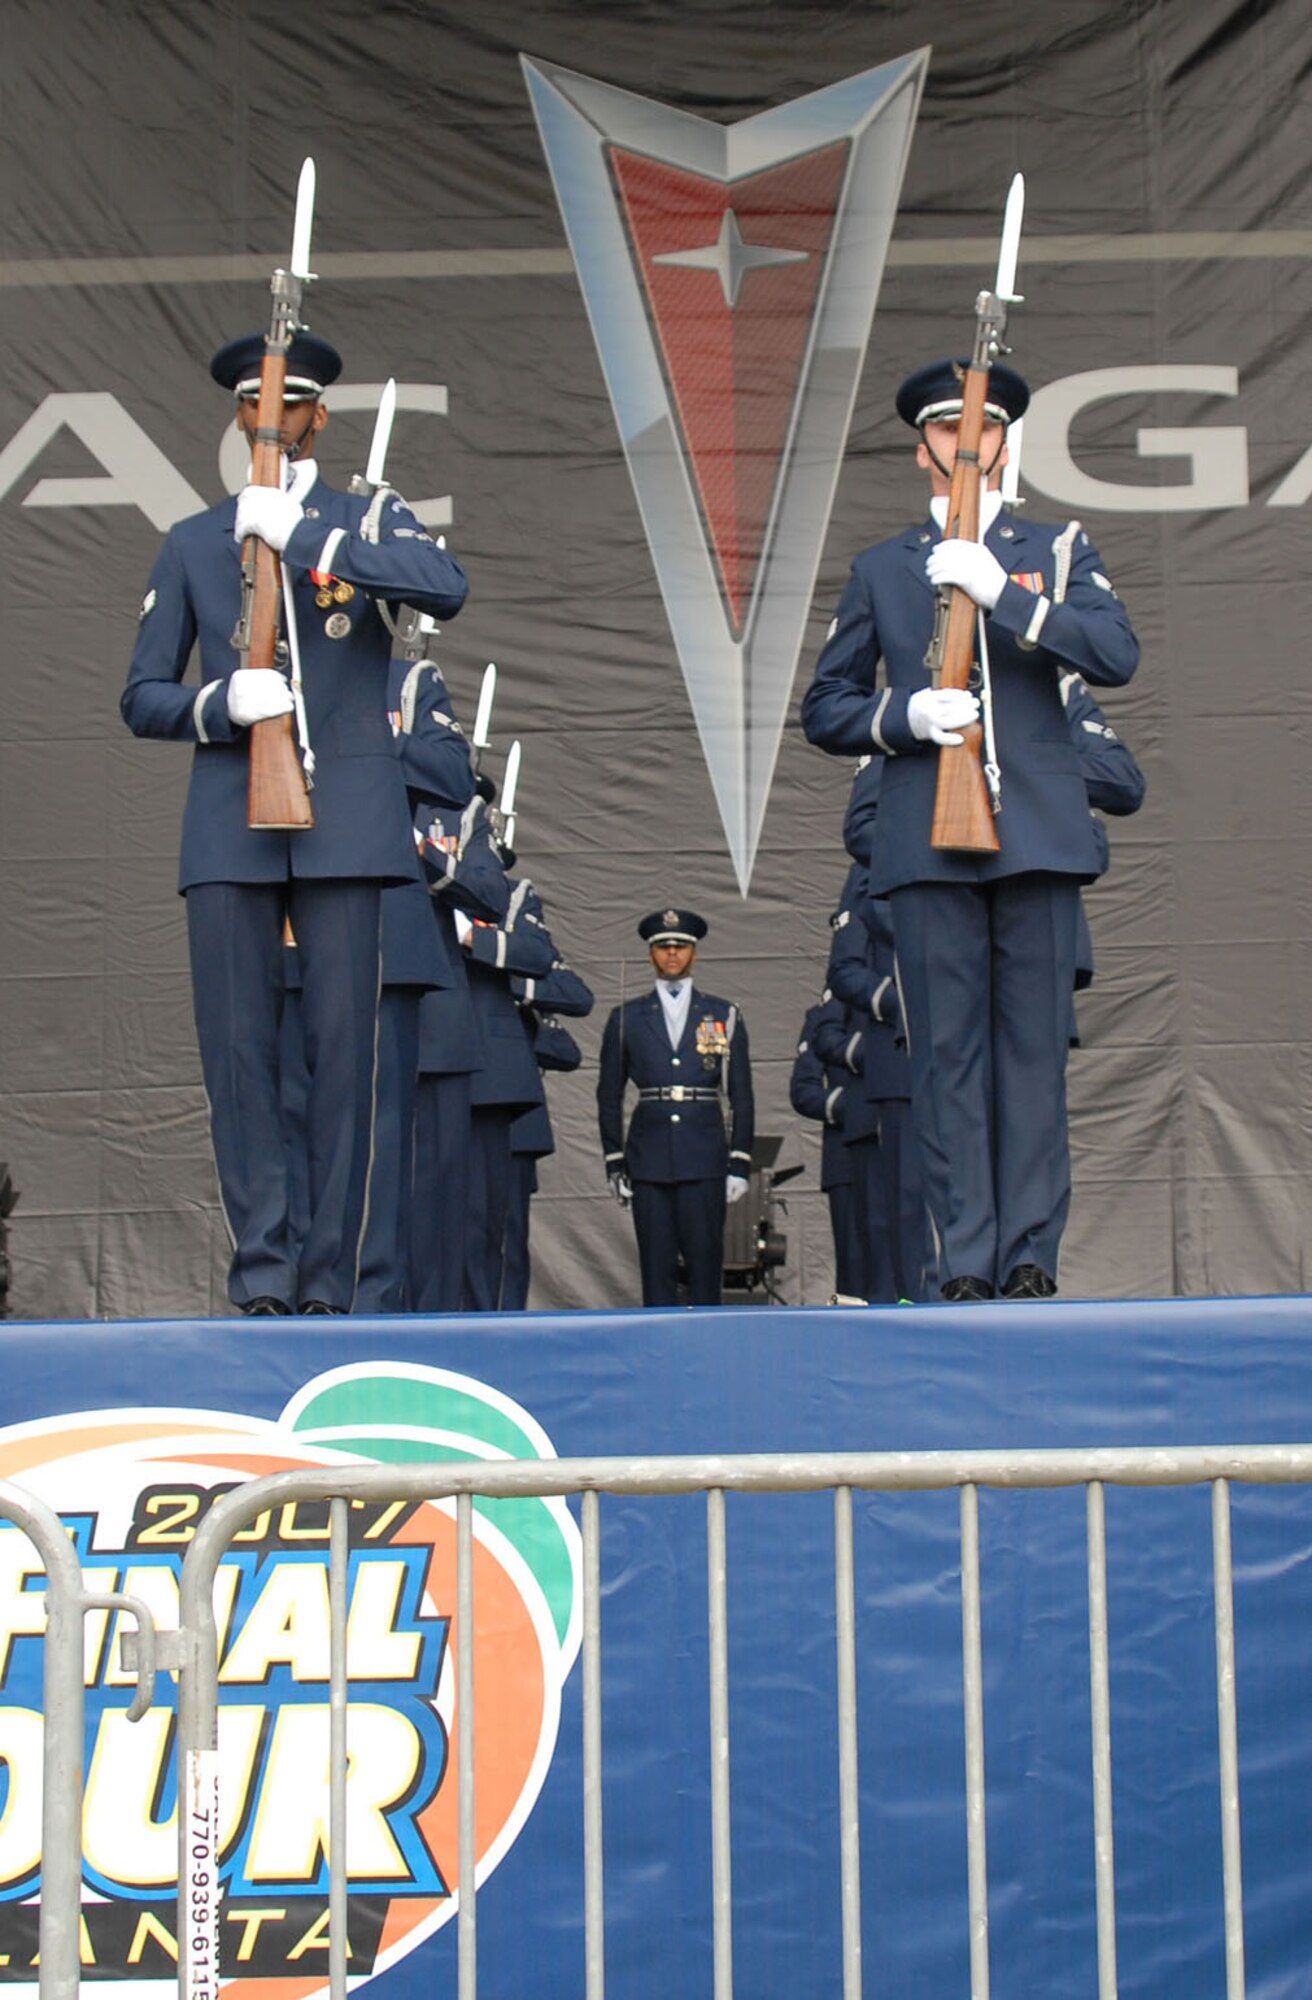 ATLANTA, Ga. -- Air Force Honor Guard Drill Team members perform at the opening ceremonies for the NCAA Final Four games at Centennial Olympic Park March 31.  The drill team was invited to perform at events and ceremonies surrounding the Final Four Games March 31 - April 2.